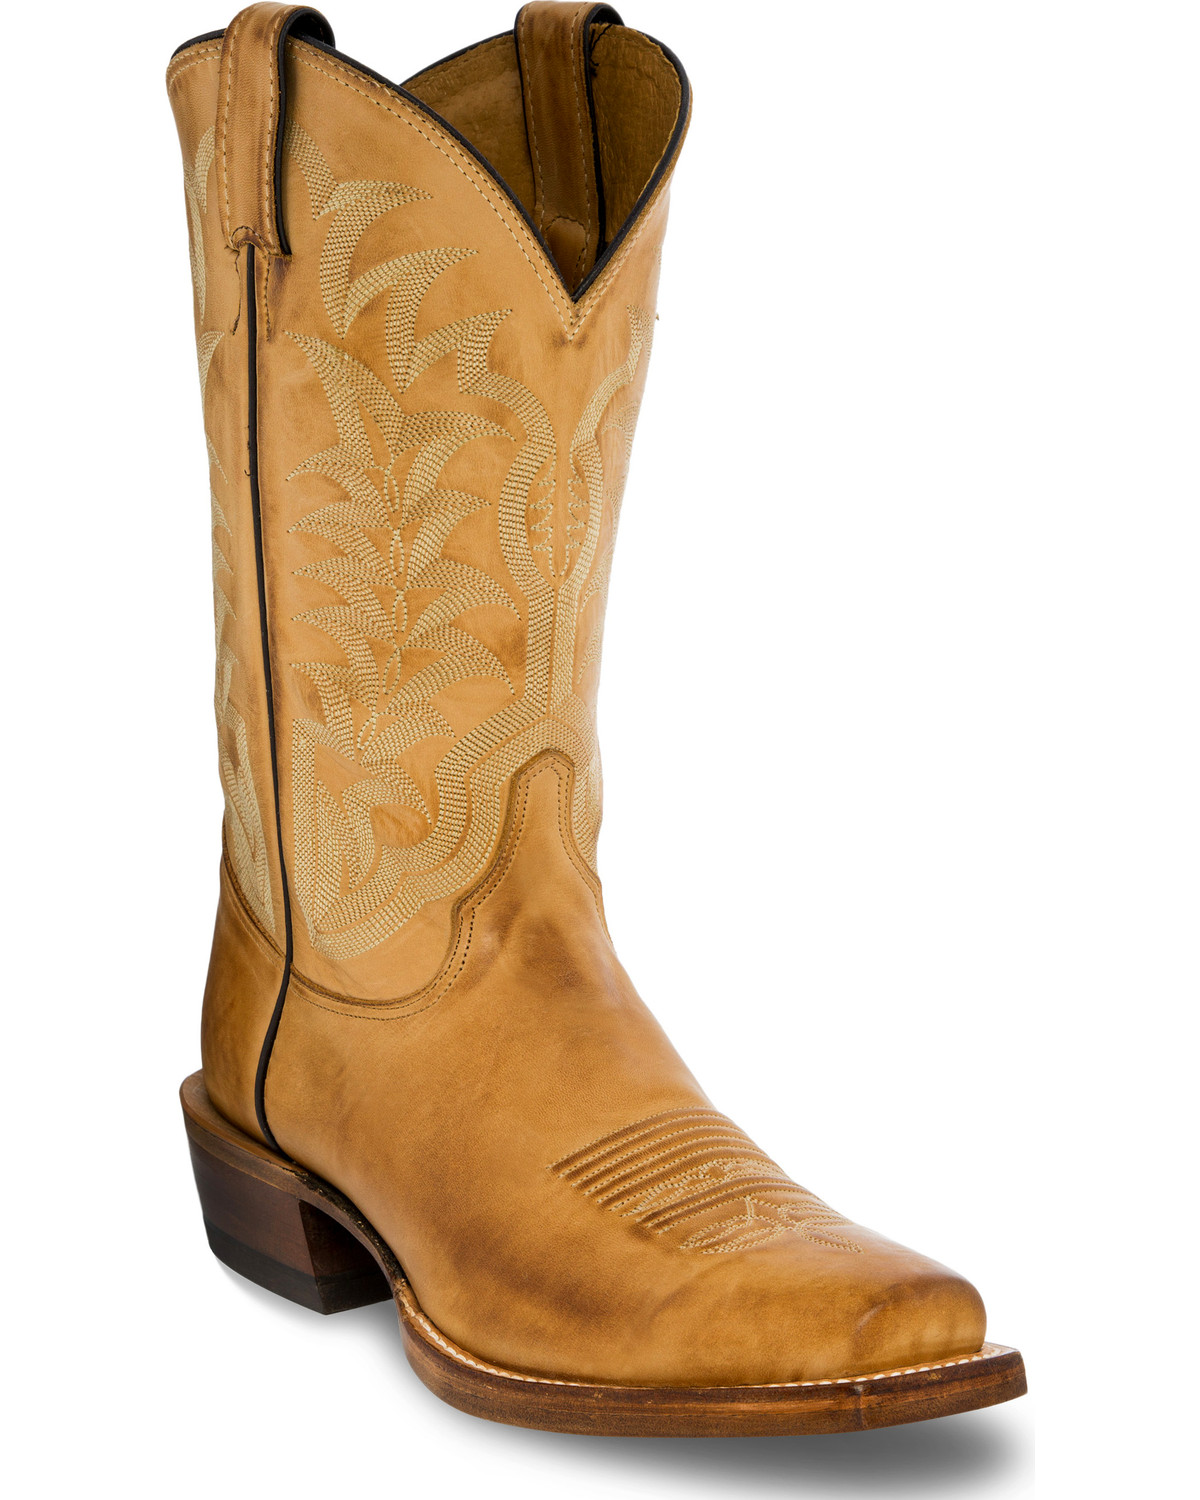 Buy > plain brown cowboy boots > in stock